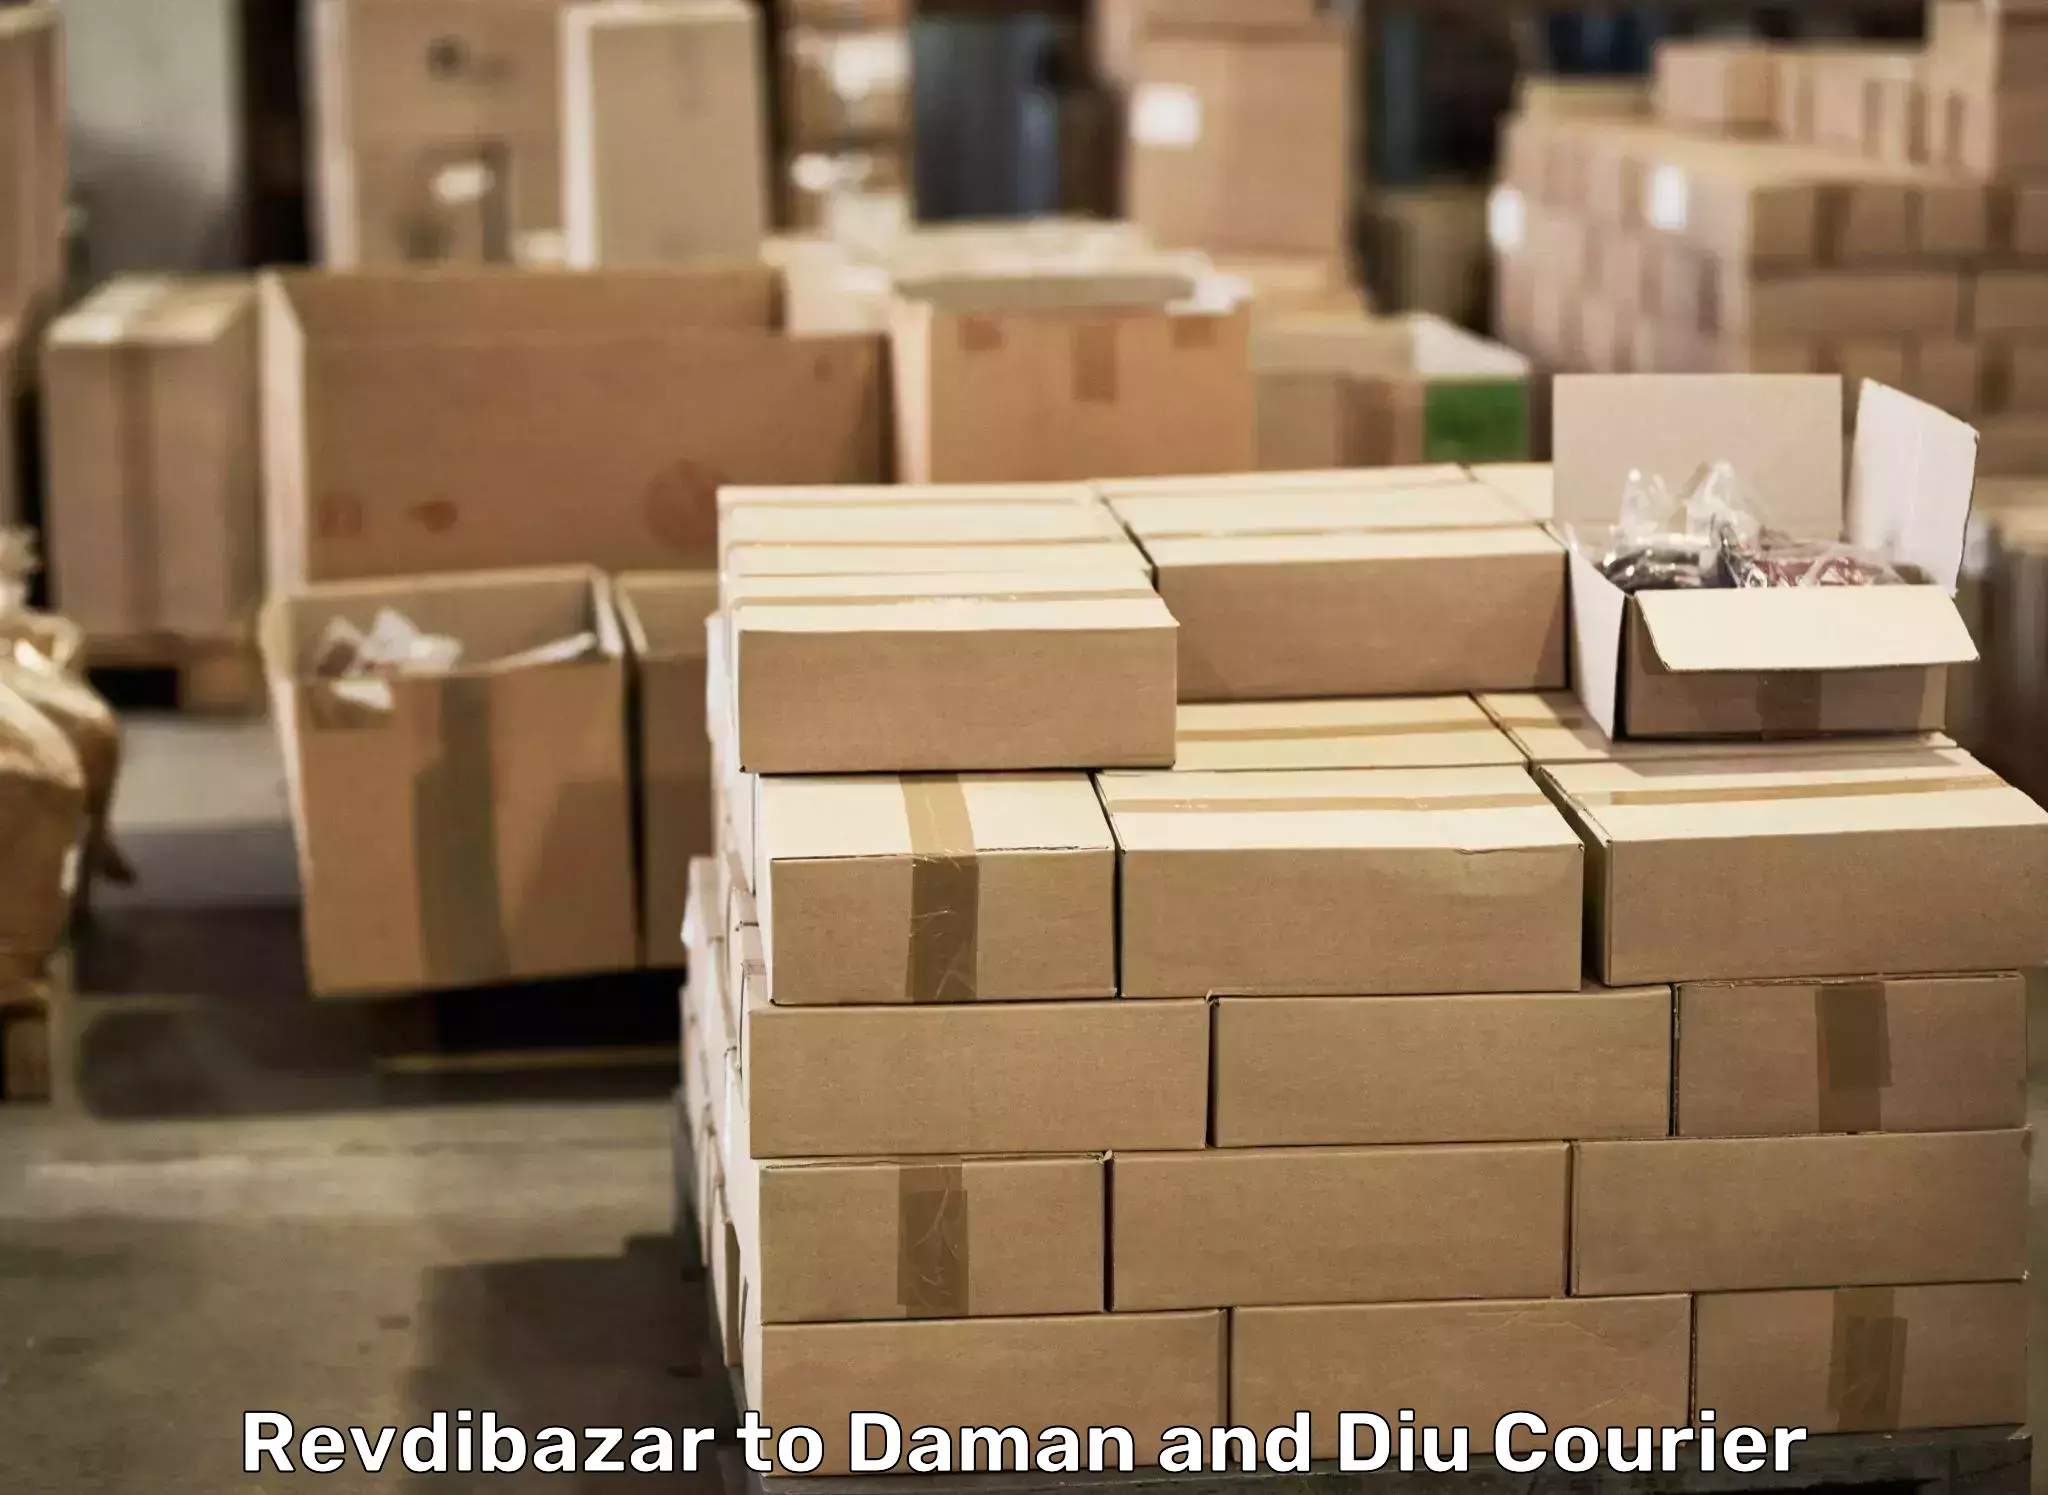 Professional movers Revdibazar to Diu